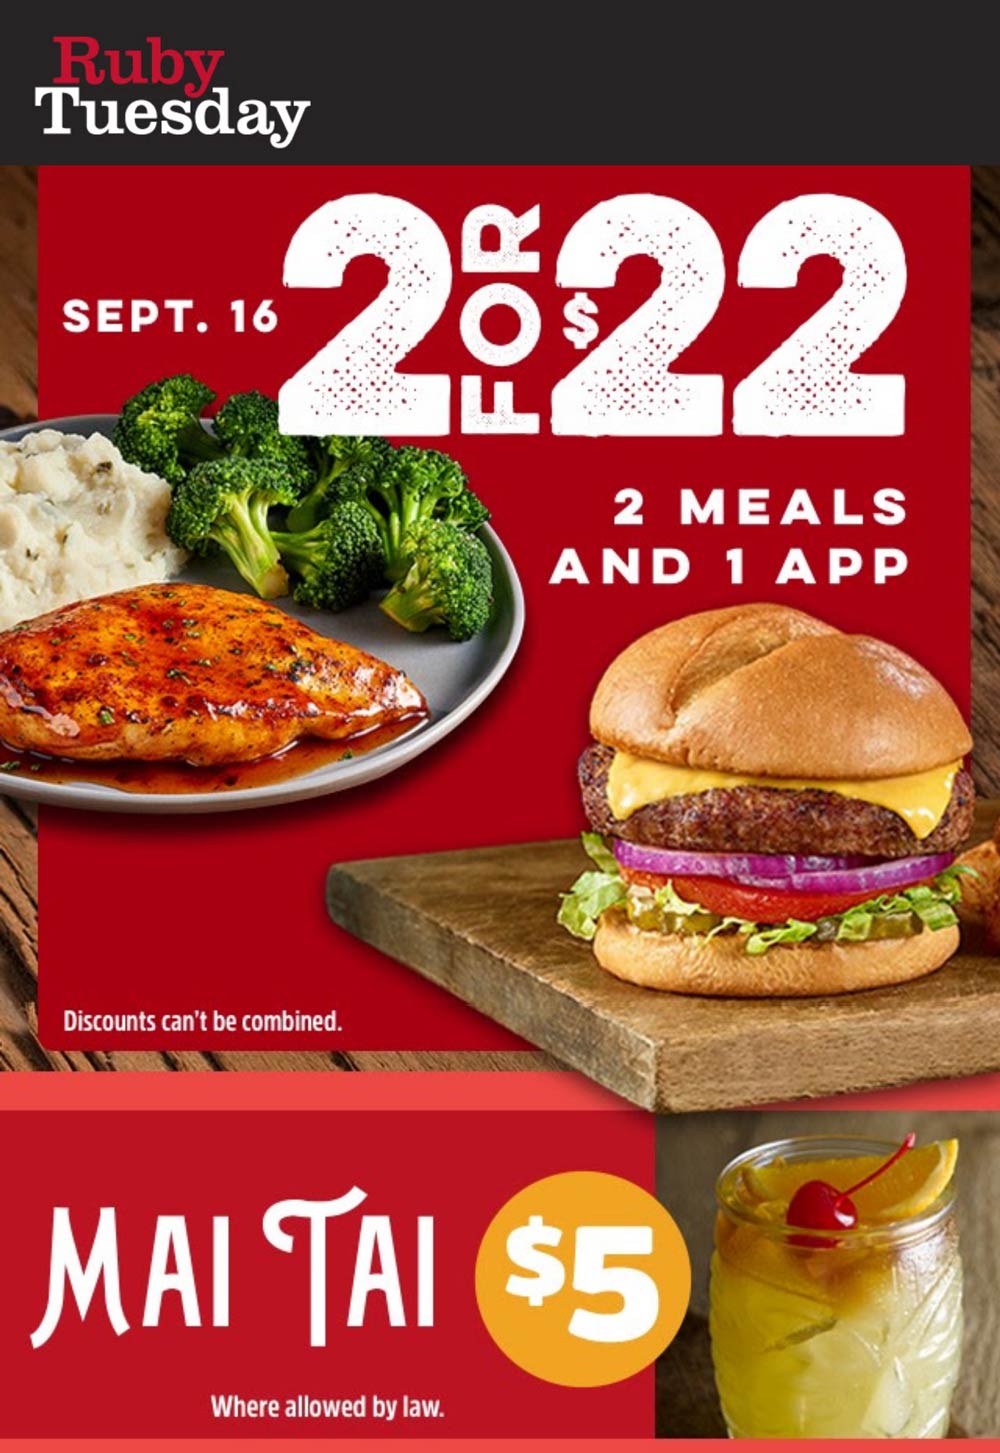 2 entrees + appetizer = 22 today at Ruby Tuesday rubytuesday The